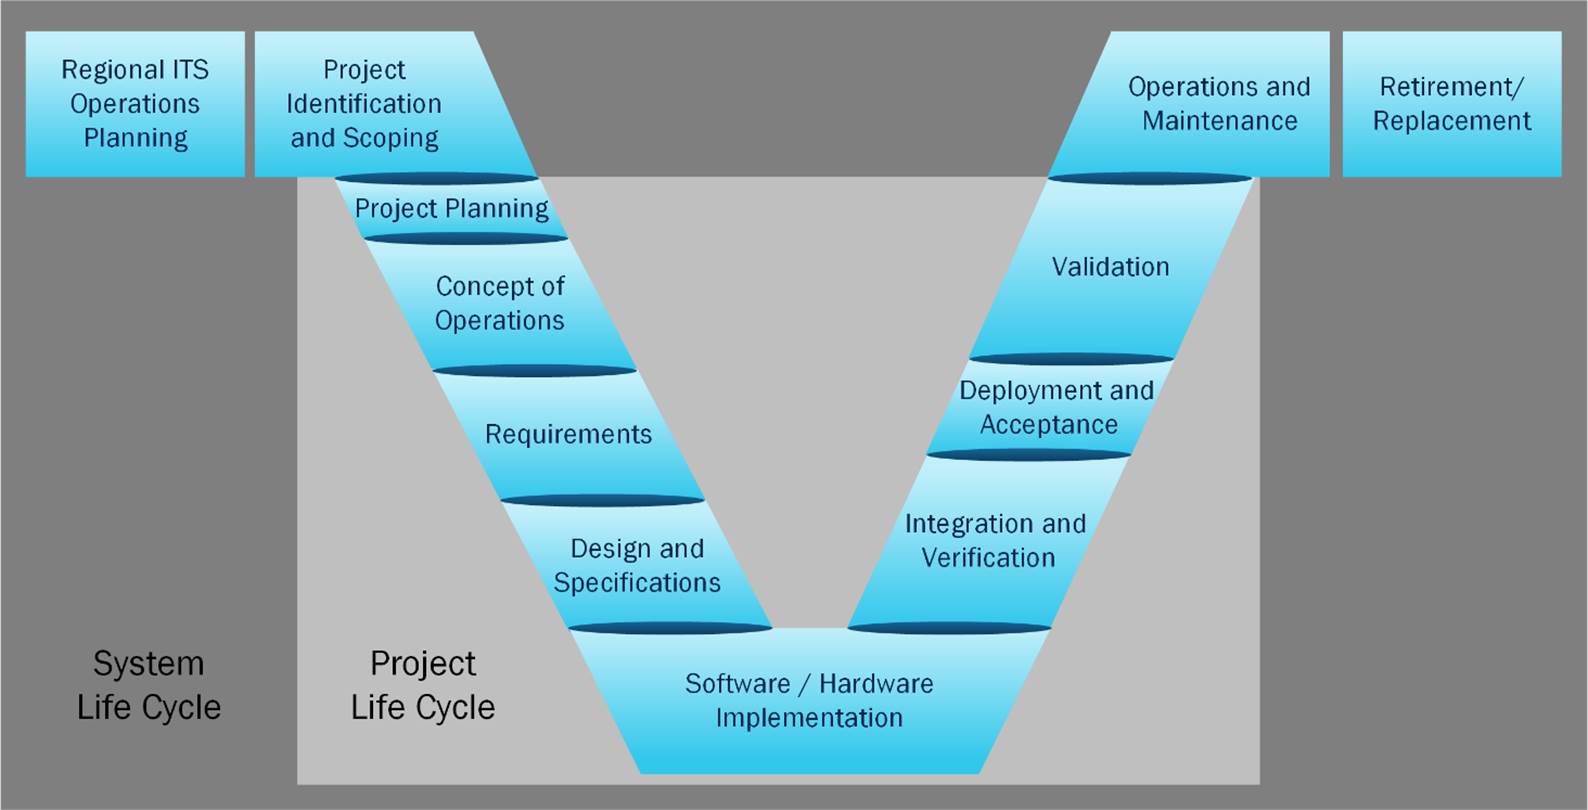 This diagram depicts the Vee diagram that describes the project life cycle within a larger context of a system life cycle.  In addition to the steps of the project life cycle from Project Planning to Validation as part of the larger system life cycle.  Above the Project Planning on the left side are  the Regional ITS Operations Planning process followed by the Project Identification and Scoping process leading into the project processes.  On the right side of the diagram, the Validation process is followed above by Operations and Maintenance followed by Retirement and Replacement.